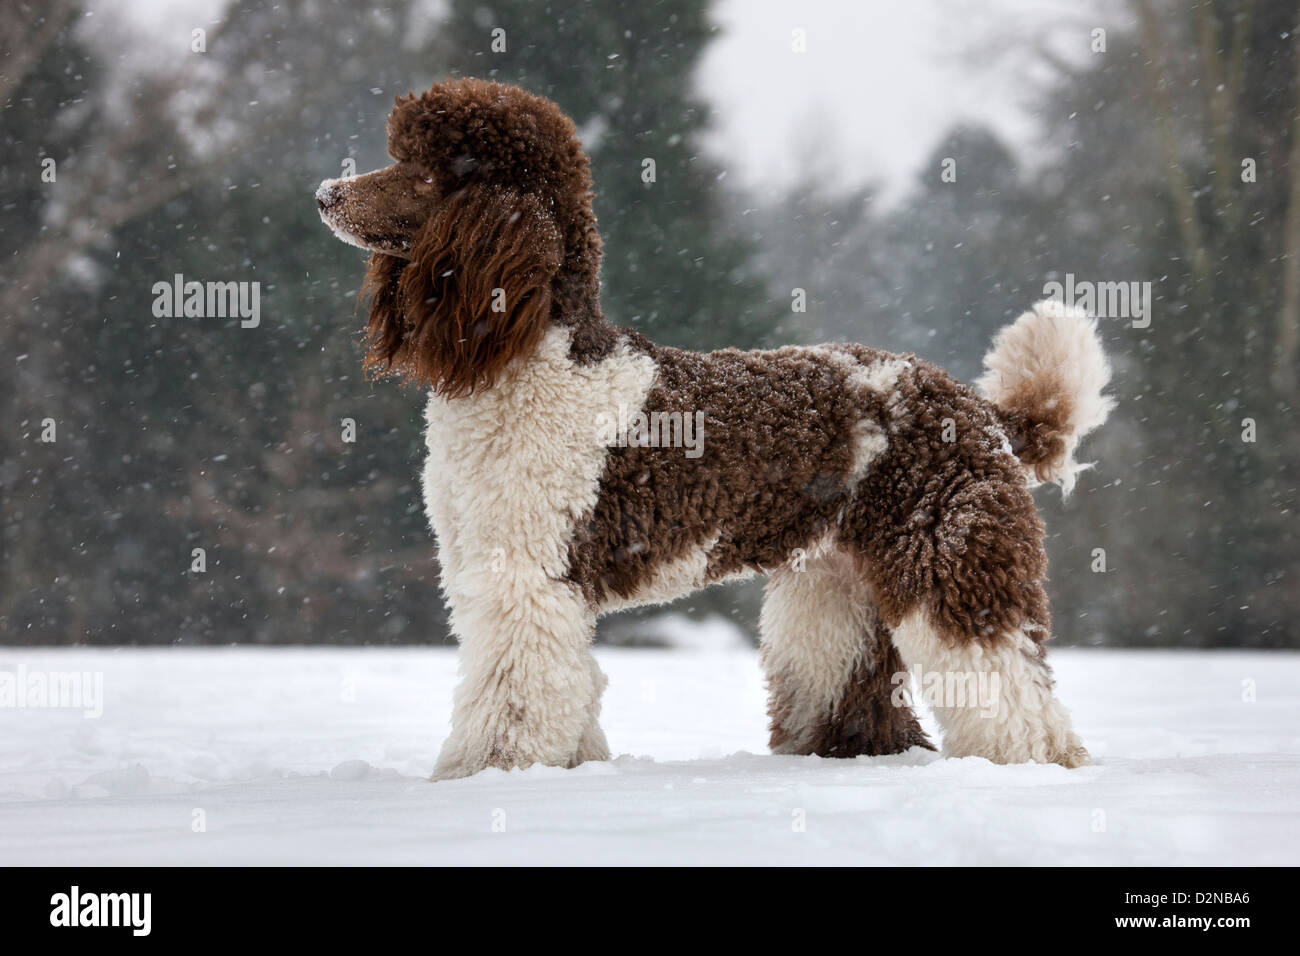 Standard poodle in the snow during snowfall in winter Stock Photo